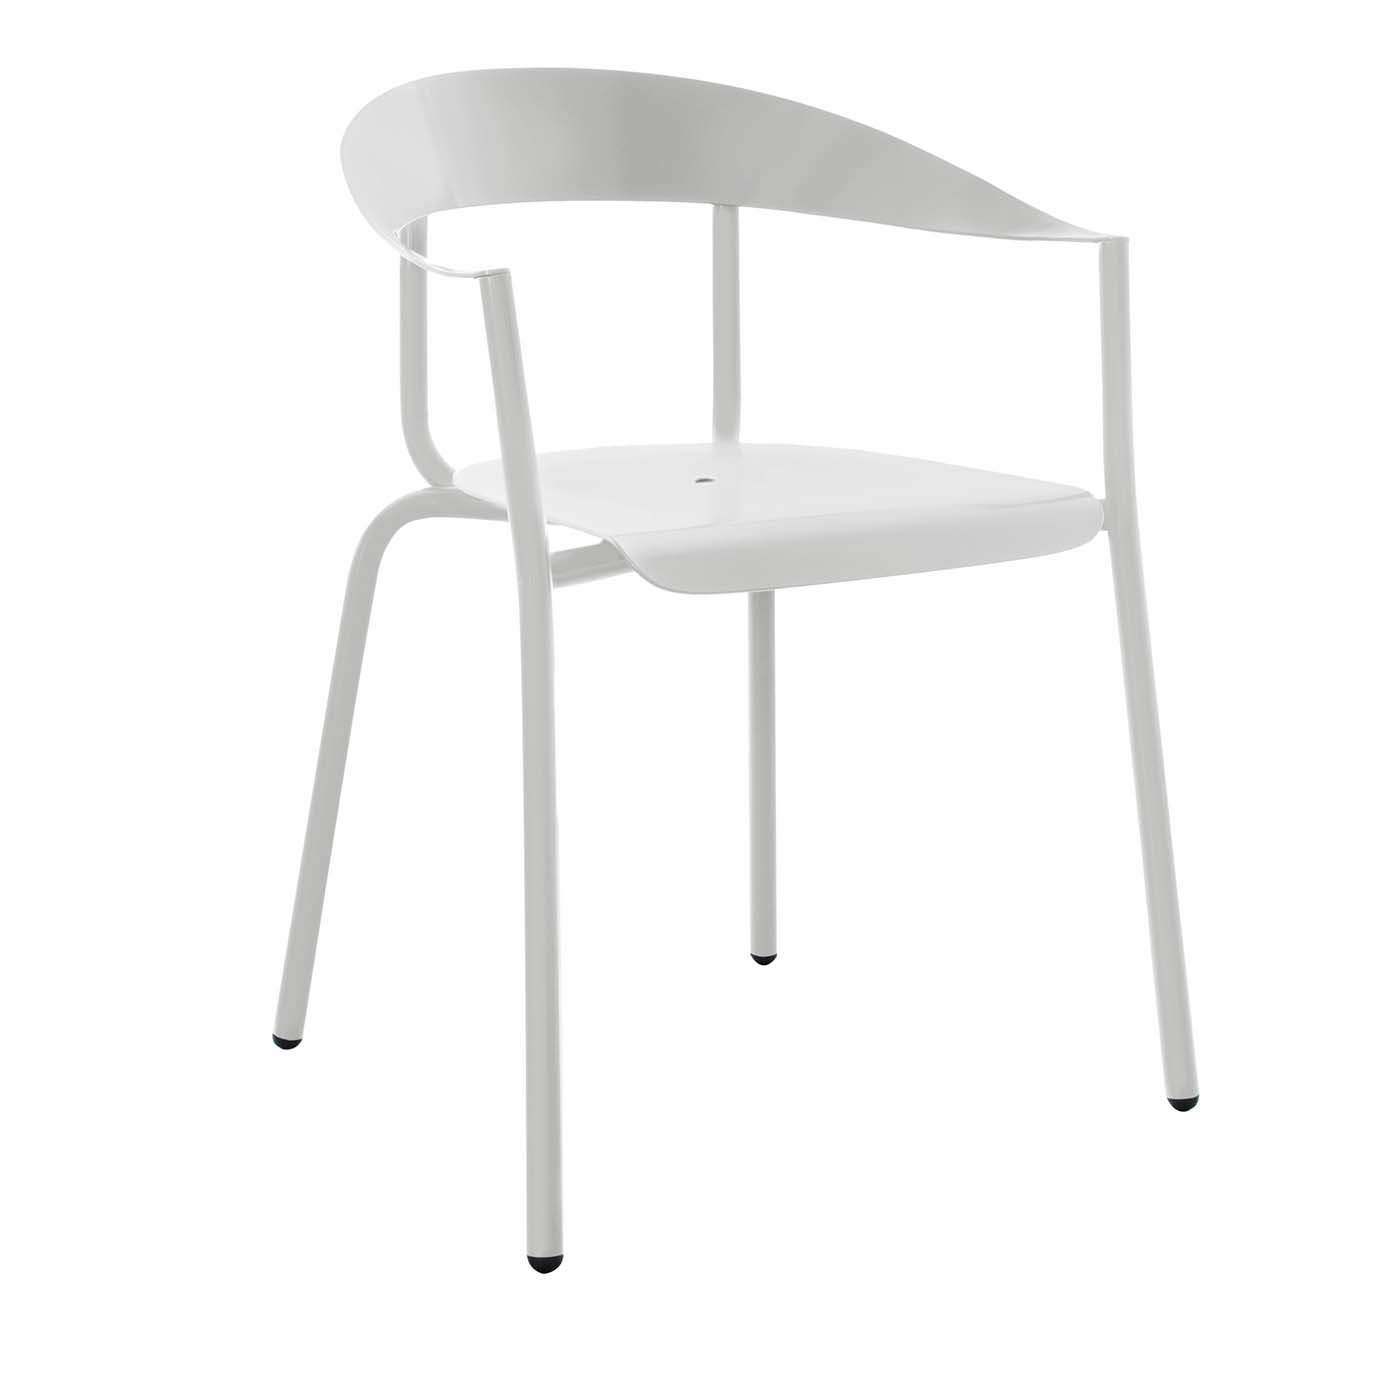 White AluMito Chair with Armrests by Pascal Bosetti - Altek Italia Design